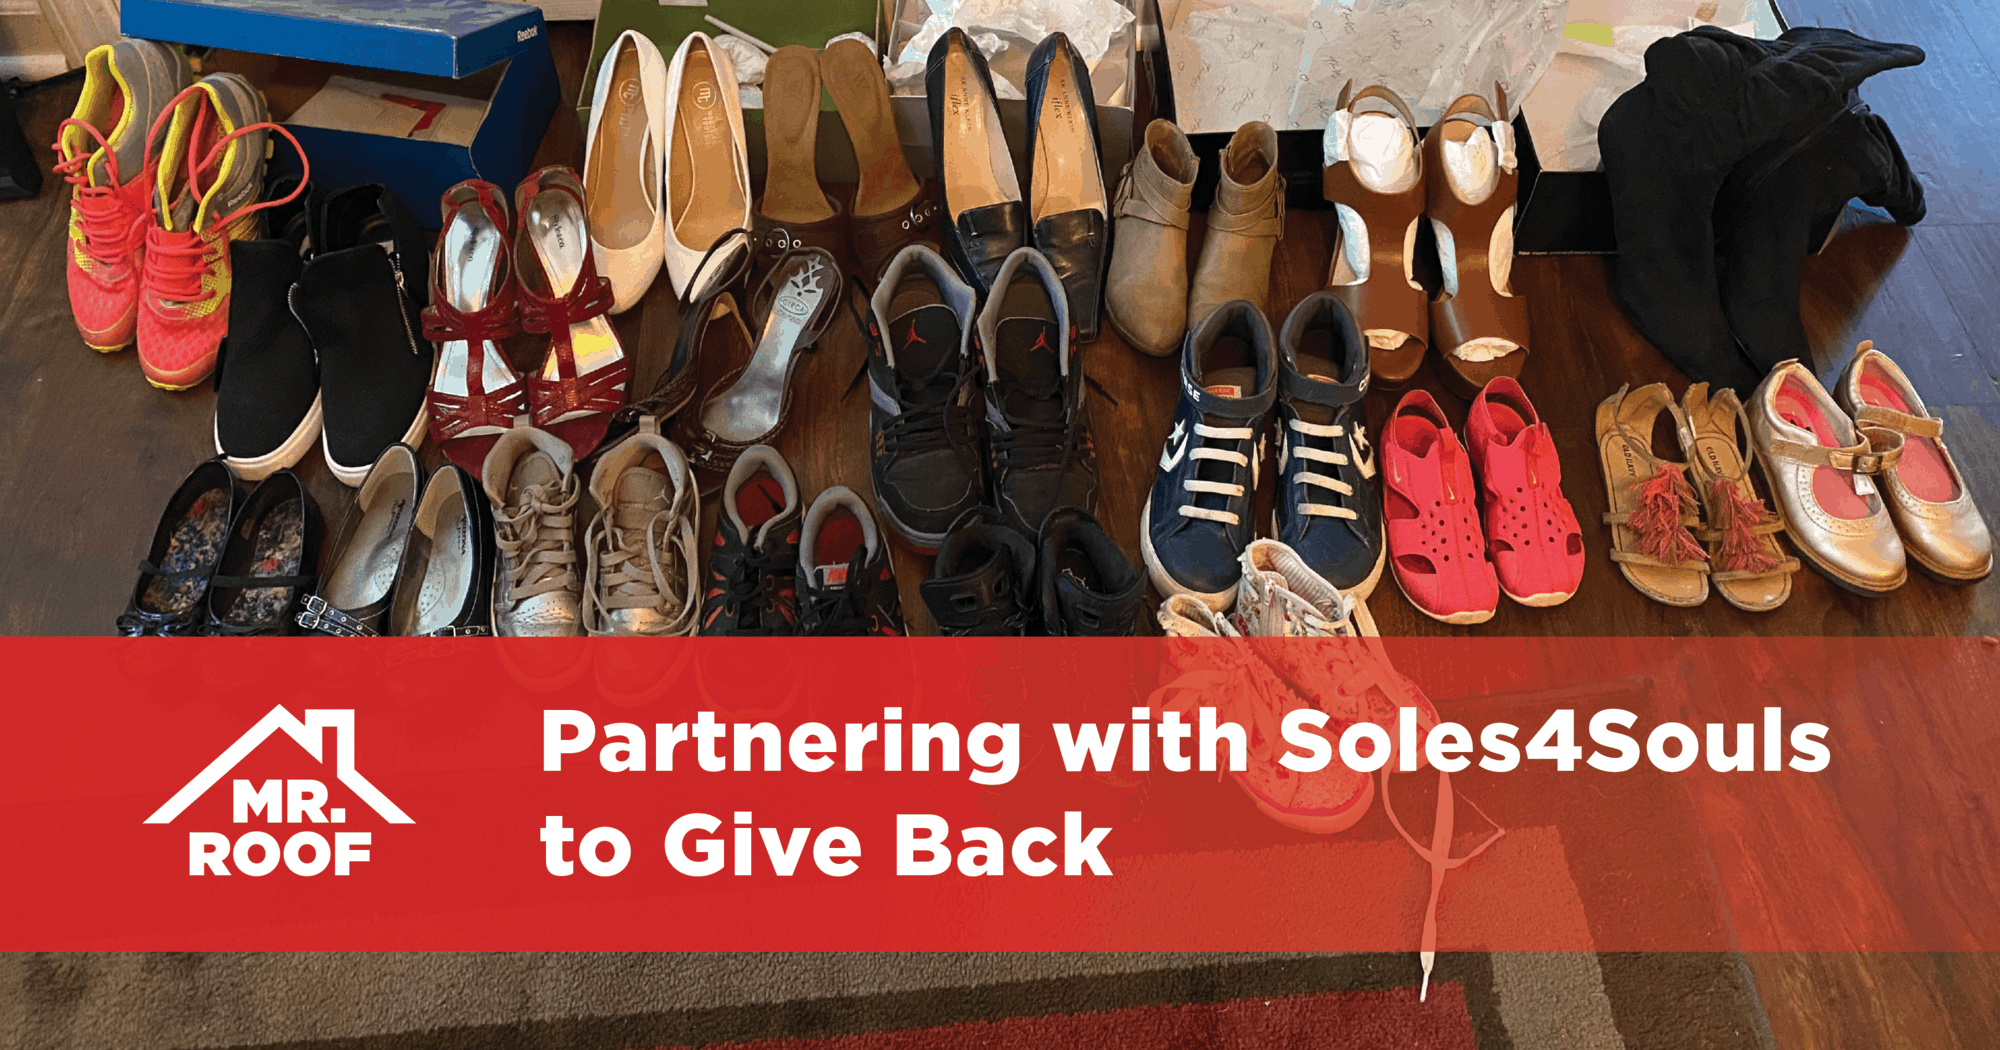 Partnering with Soles4Souls to Give Back - Mr. Roof